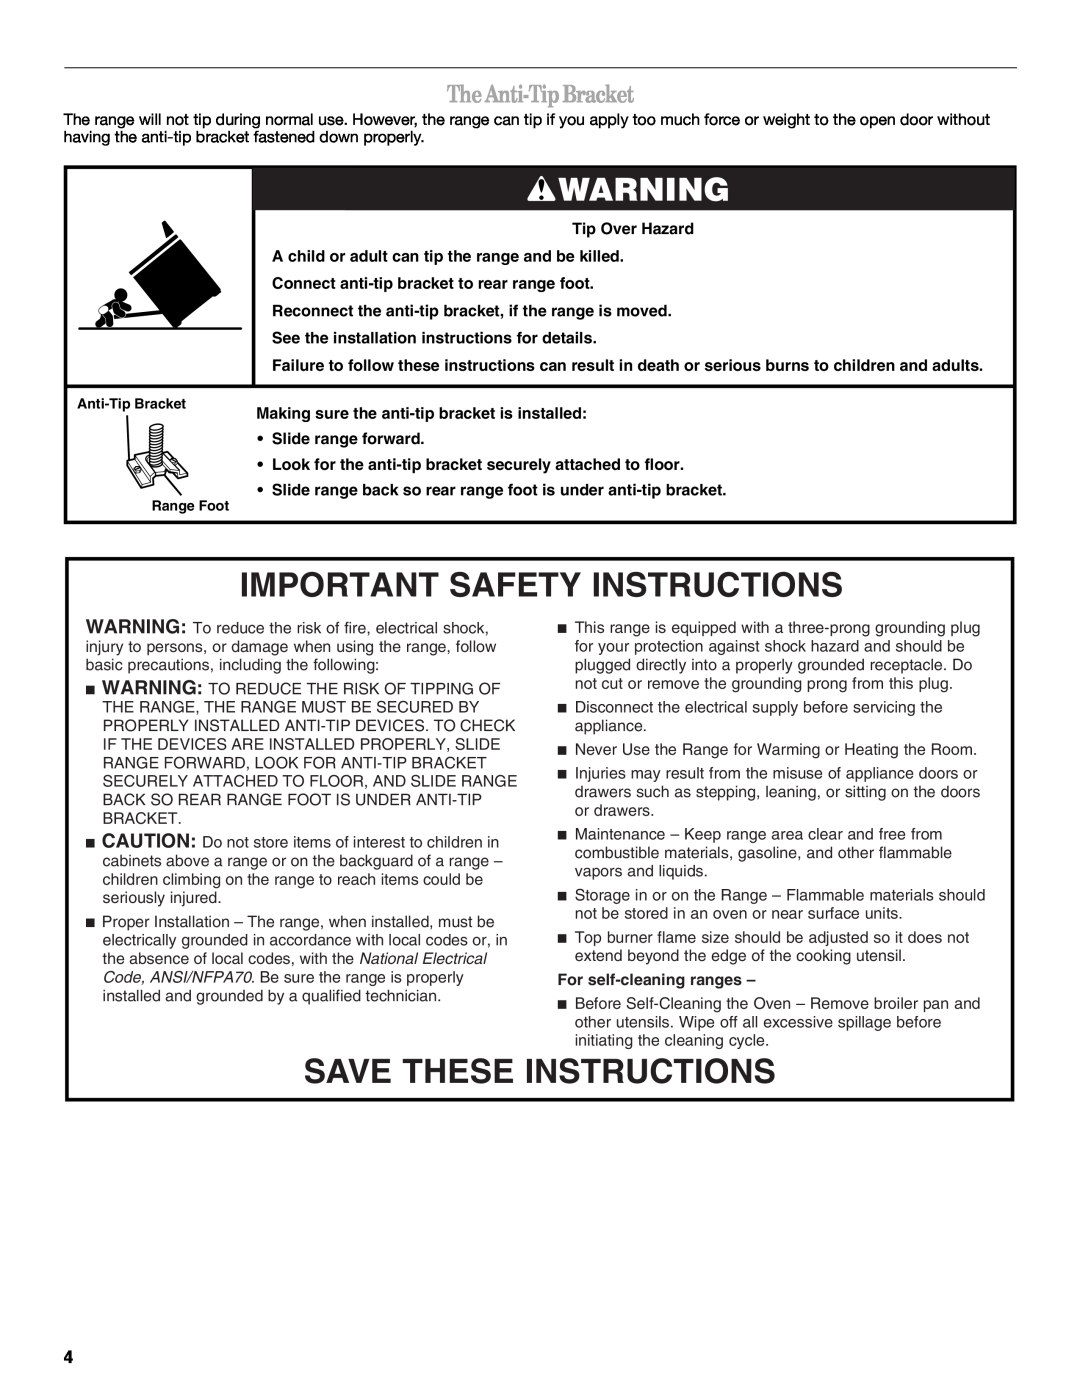 Whirlpool IGS325RQ0 The Anti-Tip Bracket, Important Safety Instructions, Save These Instructions, For self-cleaning ranges 